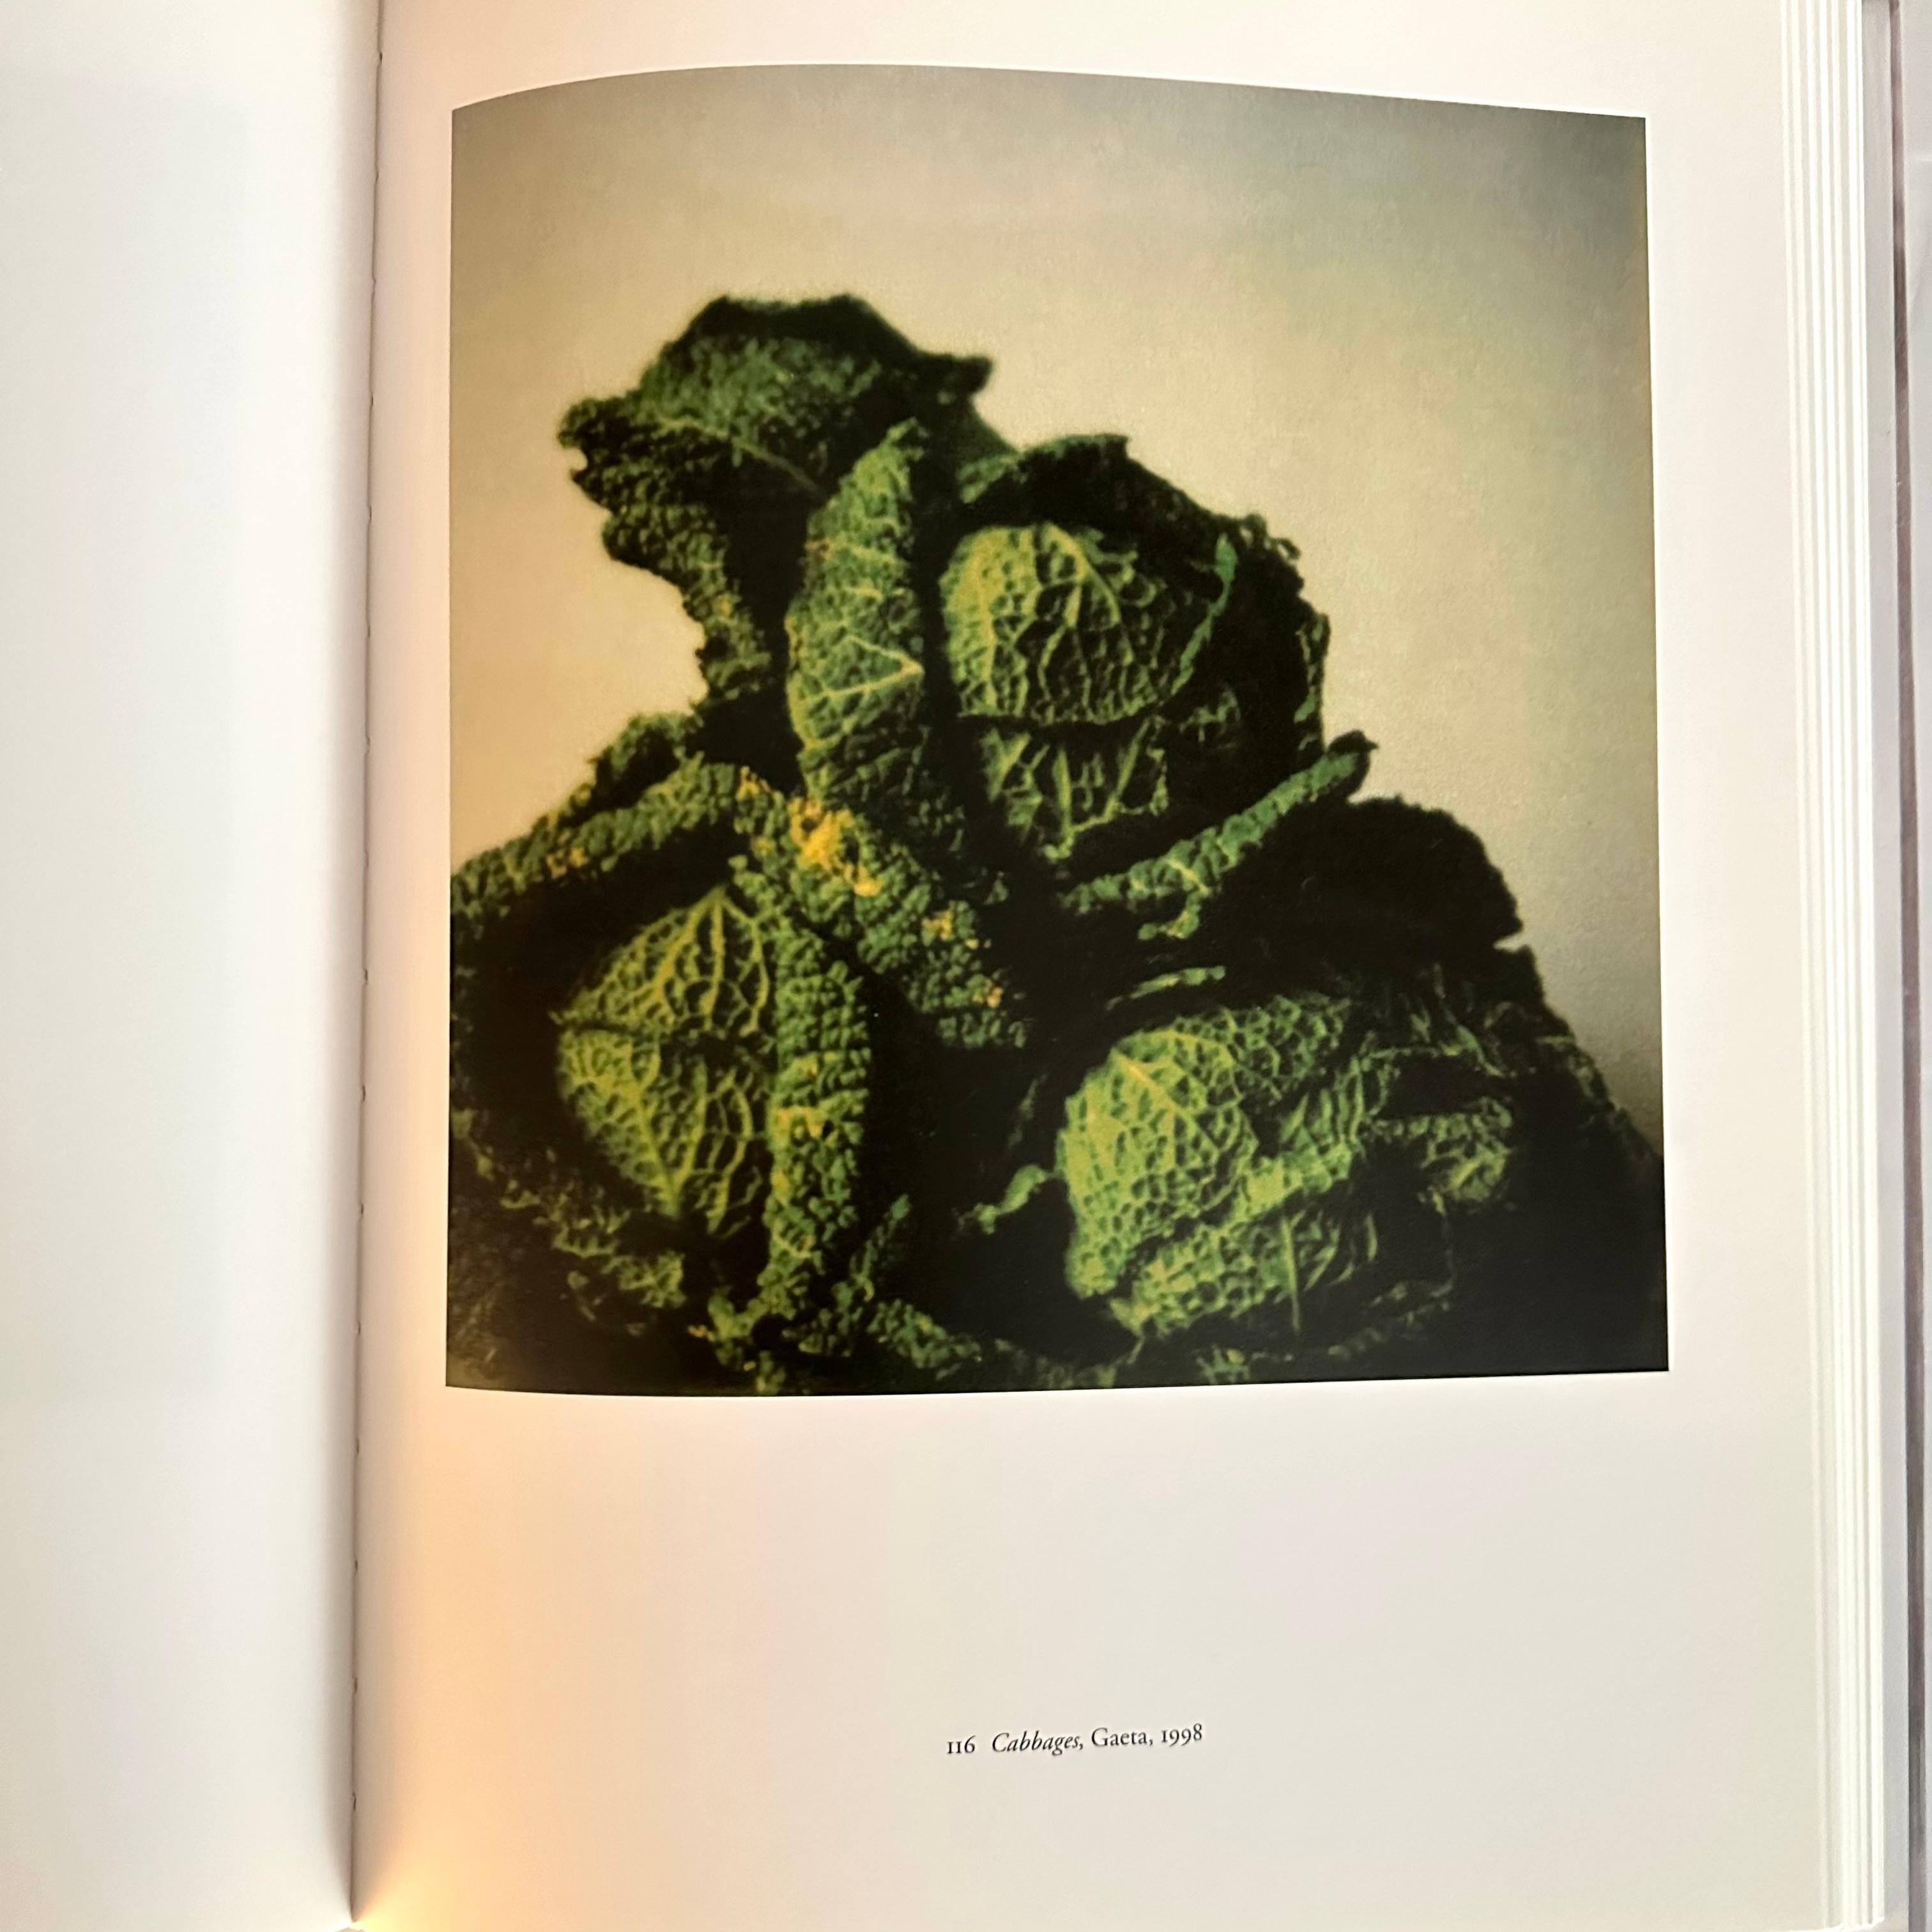 Cy Twombly Photographs 1951 -2007 - Laszlo Glozer - 1st edition, Germany, 2008 For Sale 3